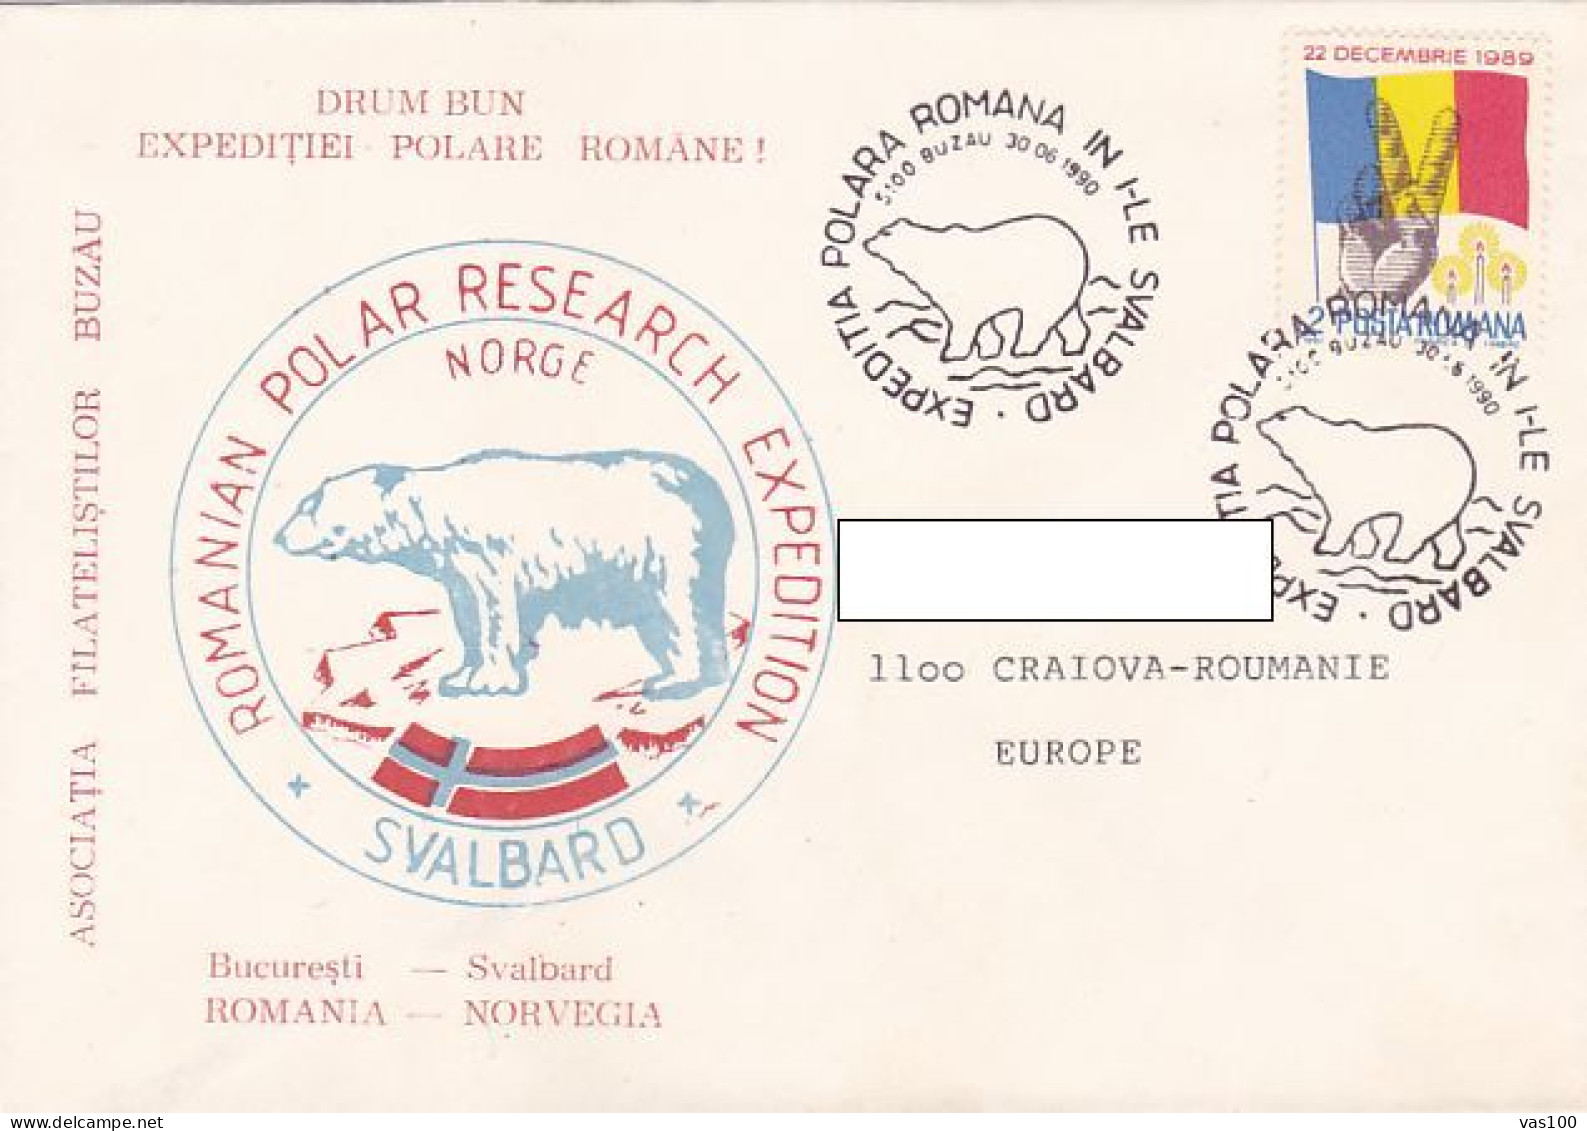 NORTH POLE, ARCTIC EXPEDITION, ROMANIAN EXPEDITION IN SVALBARD, POLAR BEAR, SPECIAL COVER, 1990, ROMANIA - Expéditions Arctiques